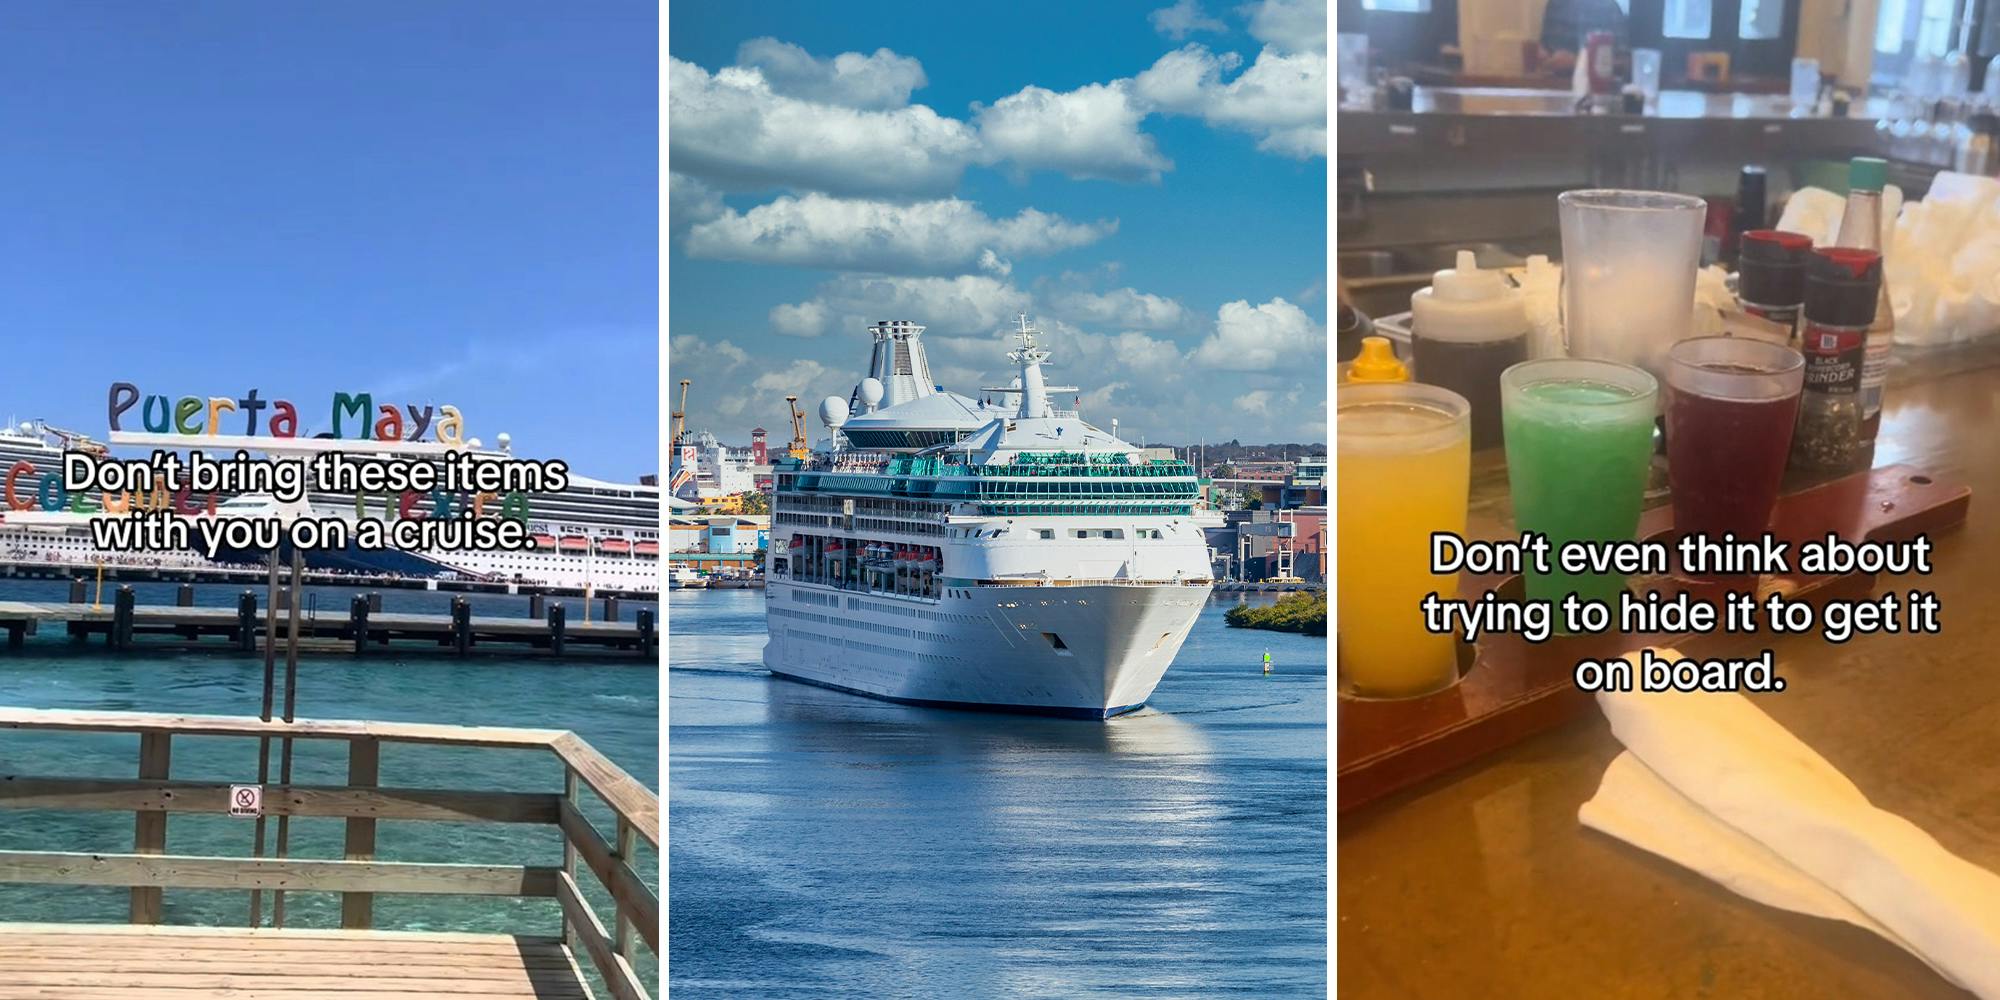 Cruise expert shares what not to bring on cruise